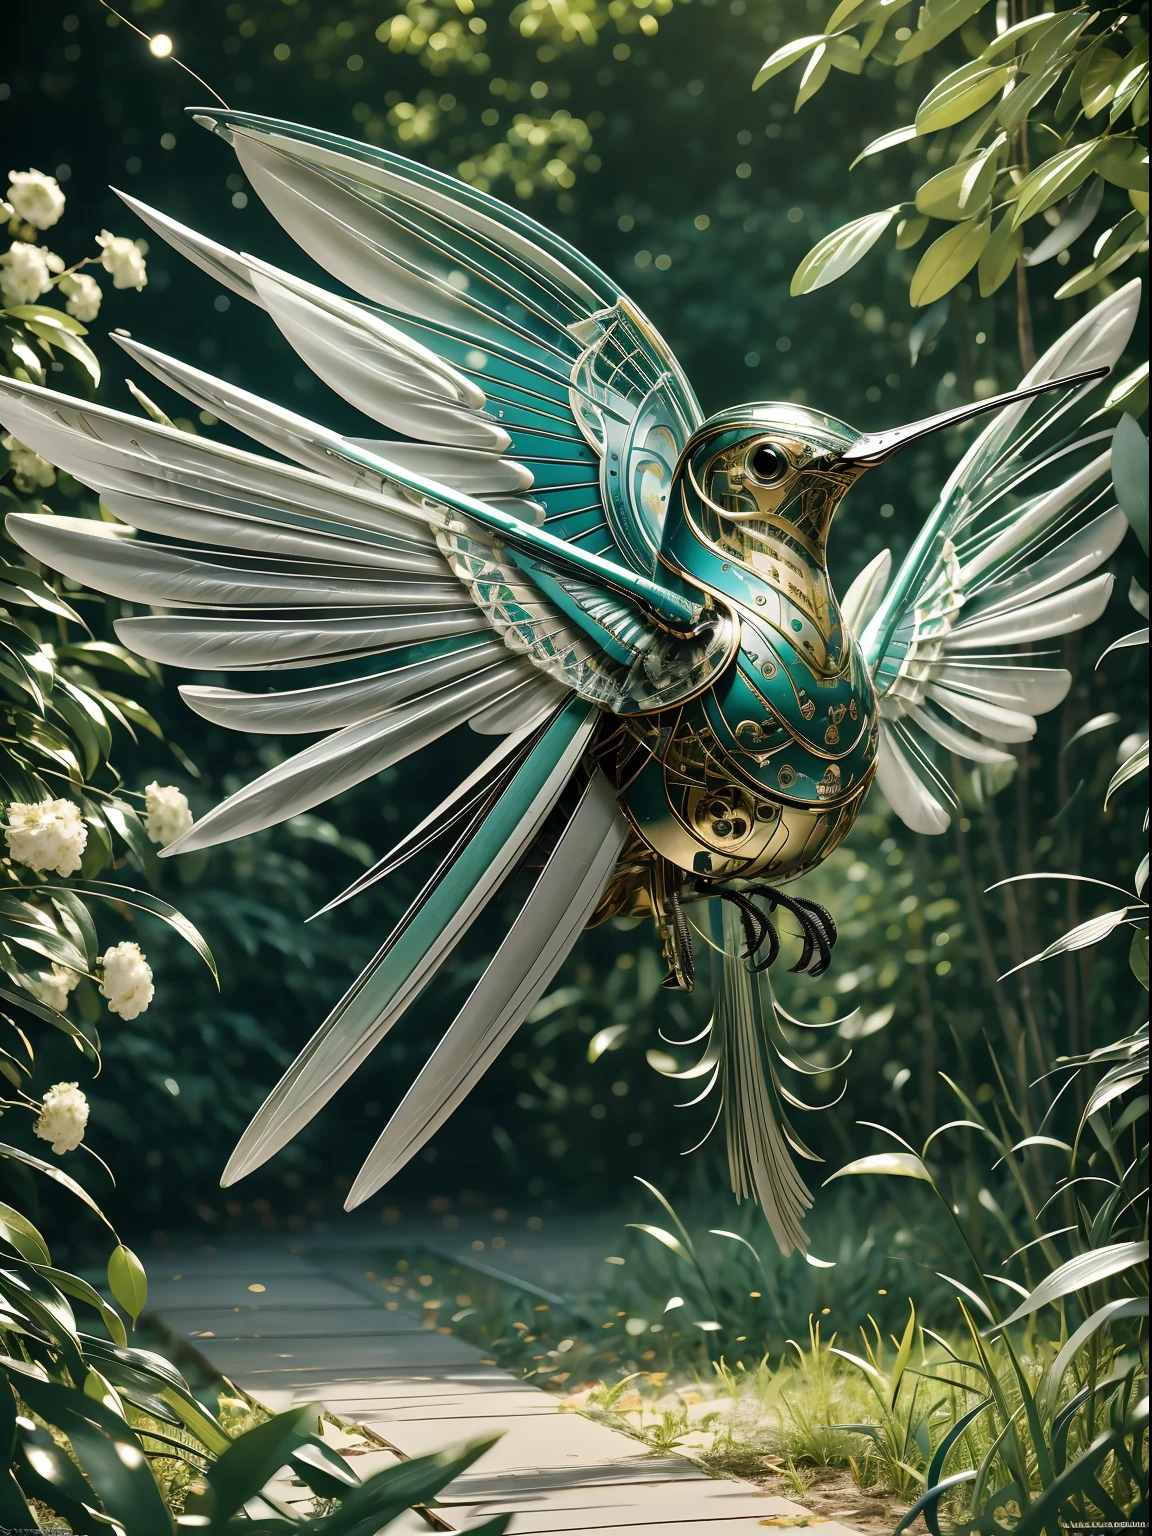 A delicate, bio-mechanical hummingbird with intricately designed, intertwining metal and feather components, sipping nectar from a vibrant flower speaker in a lush garden. mechanical bird, mindwarp, elemental, atmospheric, luminescent particles in the air, [mischief], [magic], [iridescence], meticulous, intricate, intimate, nuanced, film grain, vibrant, ray-traced caustics, subsurface scattering, soft lighting, masterpiece, masterwork, top quality, best quality, highest quality, highest fidelity, highest resolution, highres, highest detail, highly detailed, hyper-detailed, detail enhancement, deeply detailed, awe inspiring, breathtaking, super-resolution, megapixel, UHD, HDR, FHD, 8k, 16k, 32k, k, high dynamic range, insanely detailed, beautifully color graded, post processing, post production, dynamic tone mapping, volumetric, ultra-detailed, super detailed.